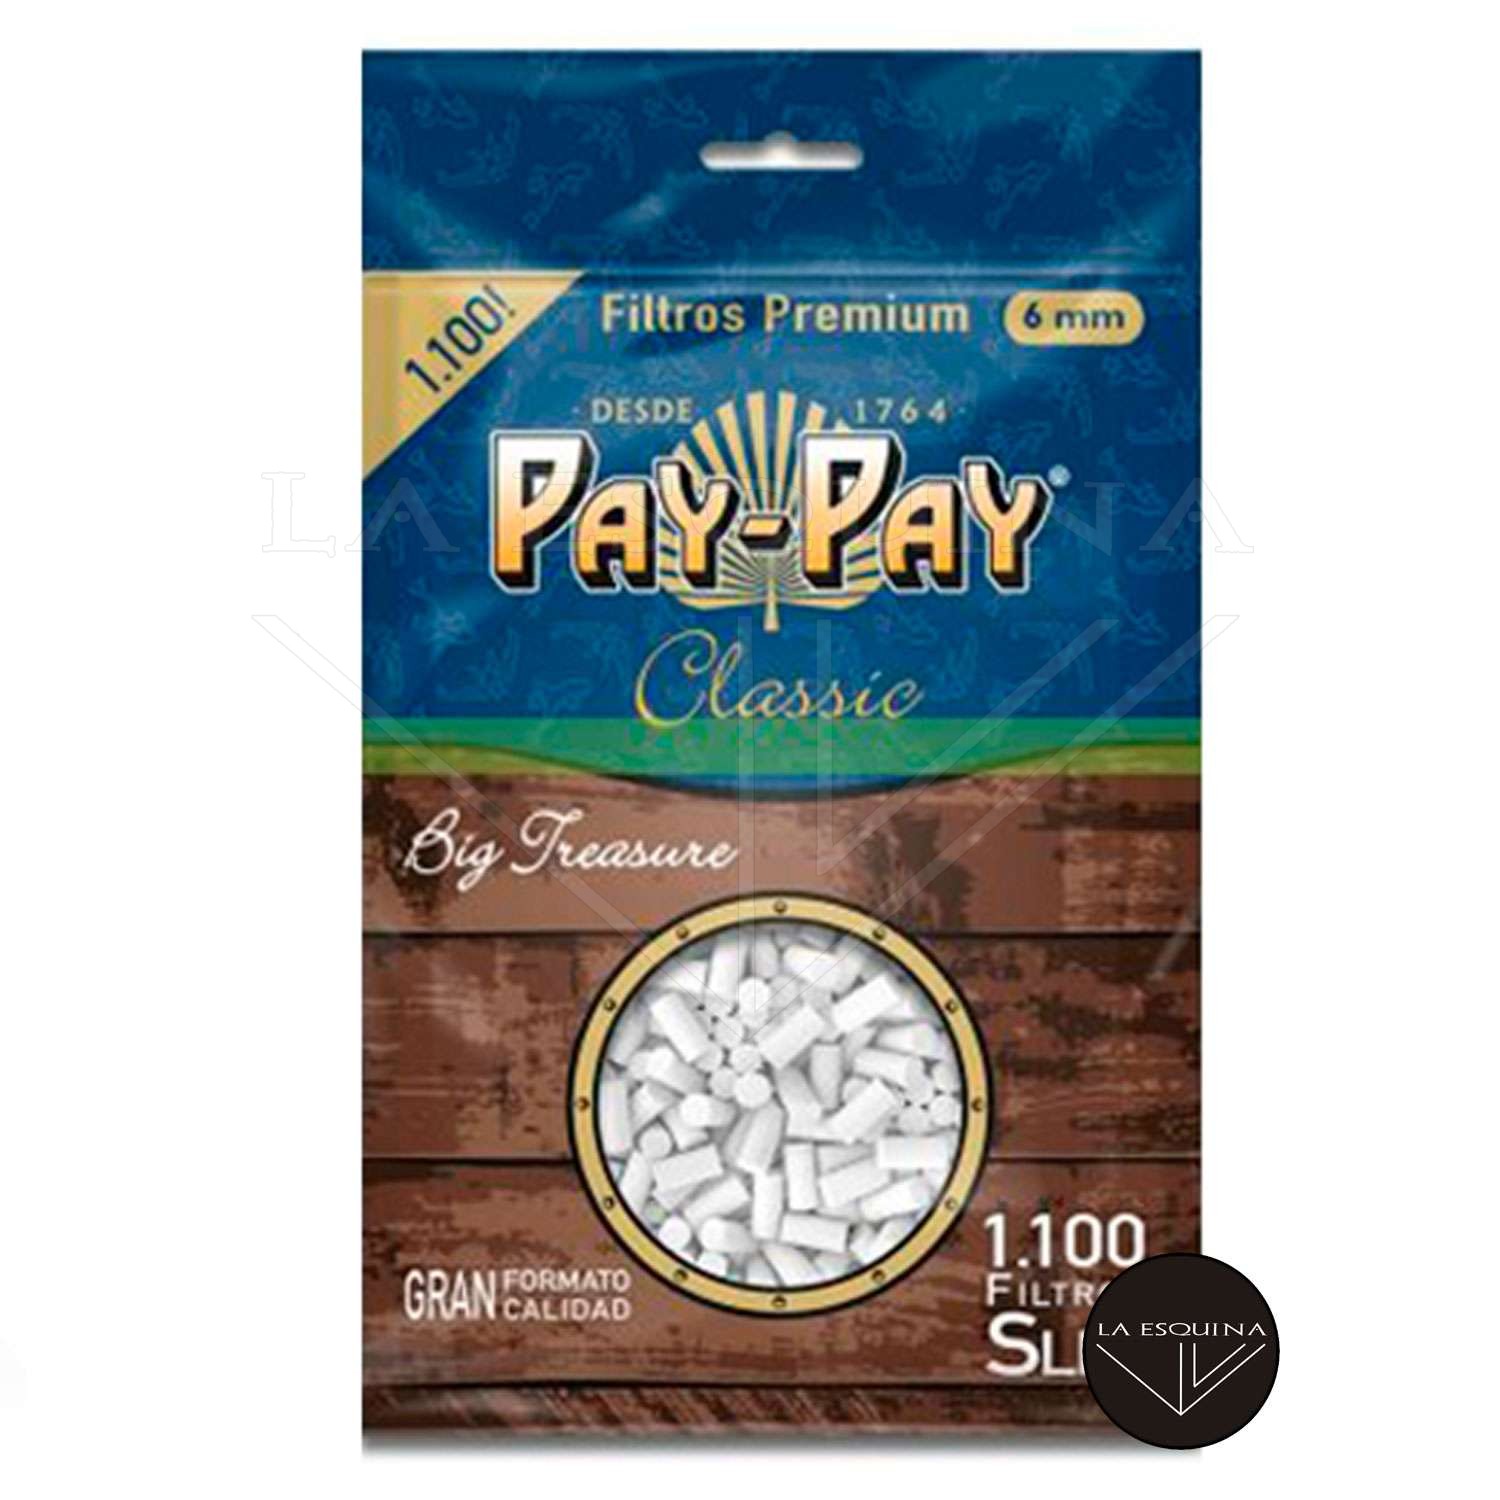 Filtros PAY-PAY Classic Slim 6 mm 1100 unidades